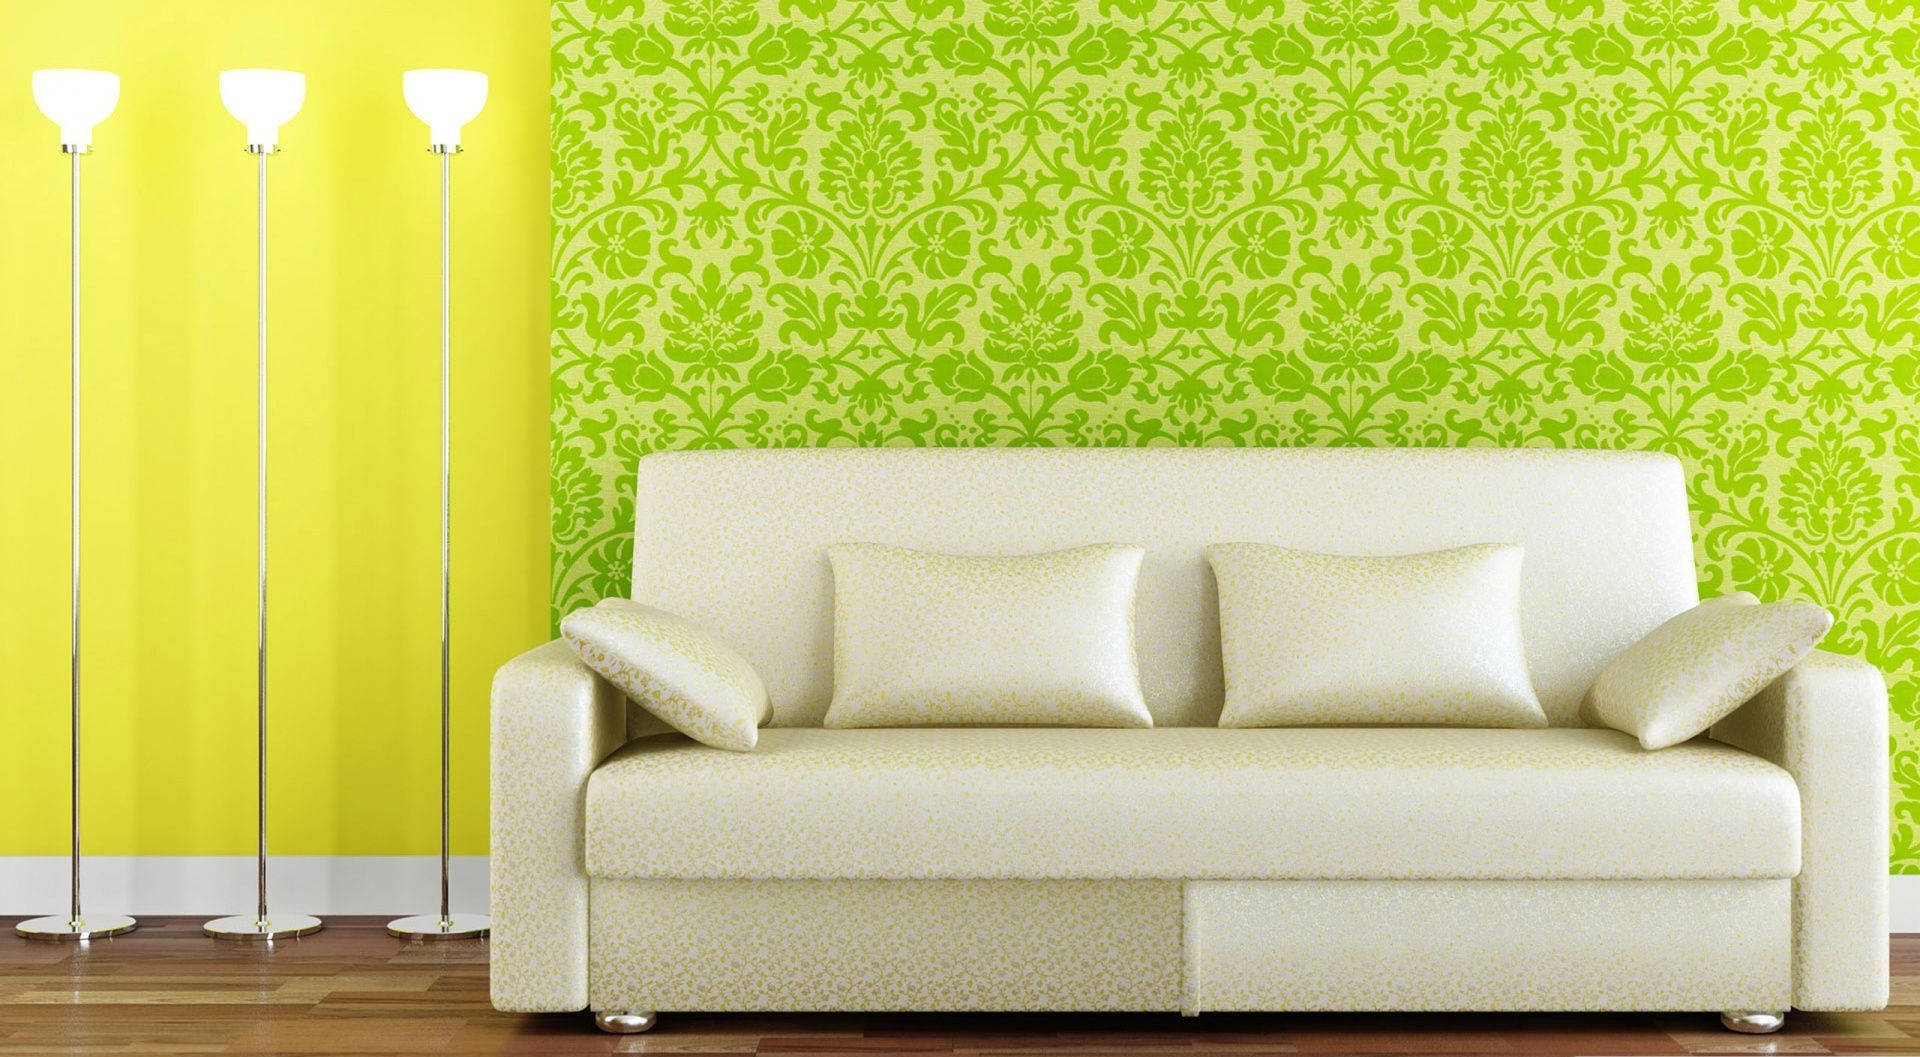 Cozy Living Room With Vibrant Green Wallpaper Background